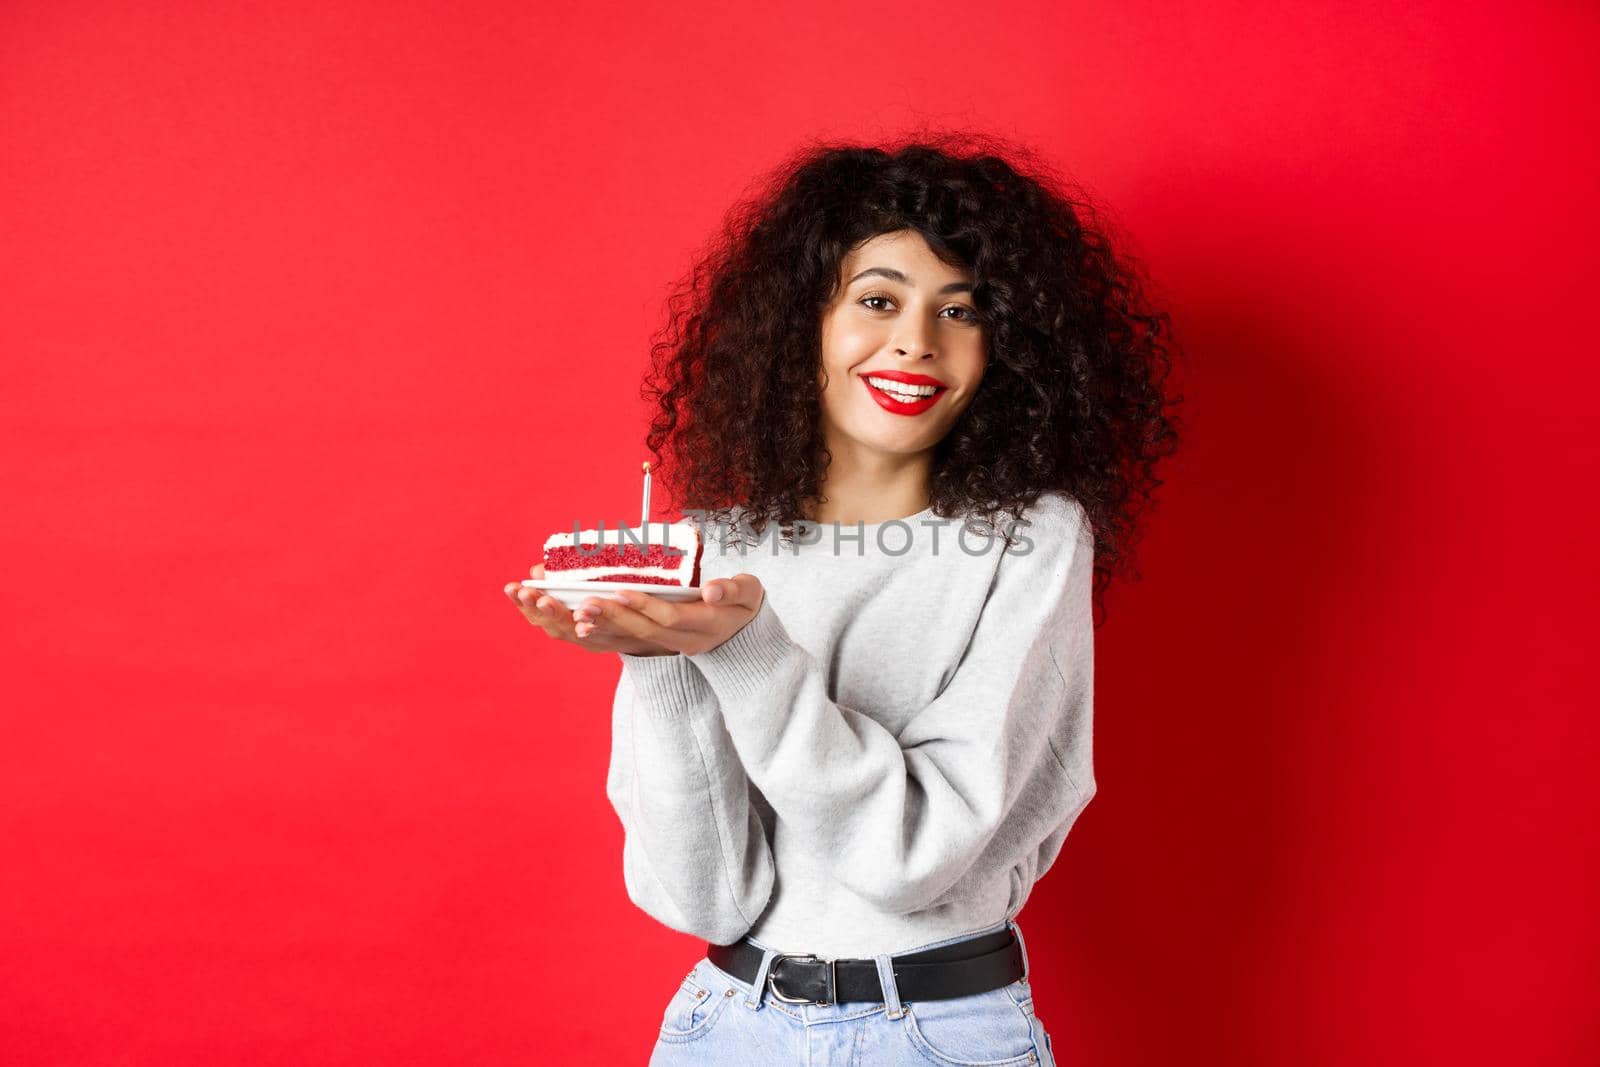 Celebration and holidays concept. Smiling beautiful woman celebrating birthday, holding b-day cake with candle and making wish, standing happy on red background.